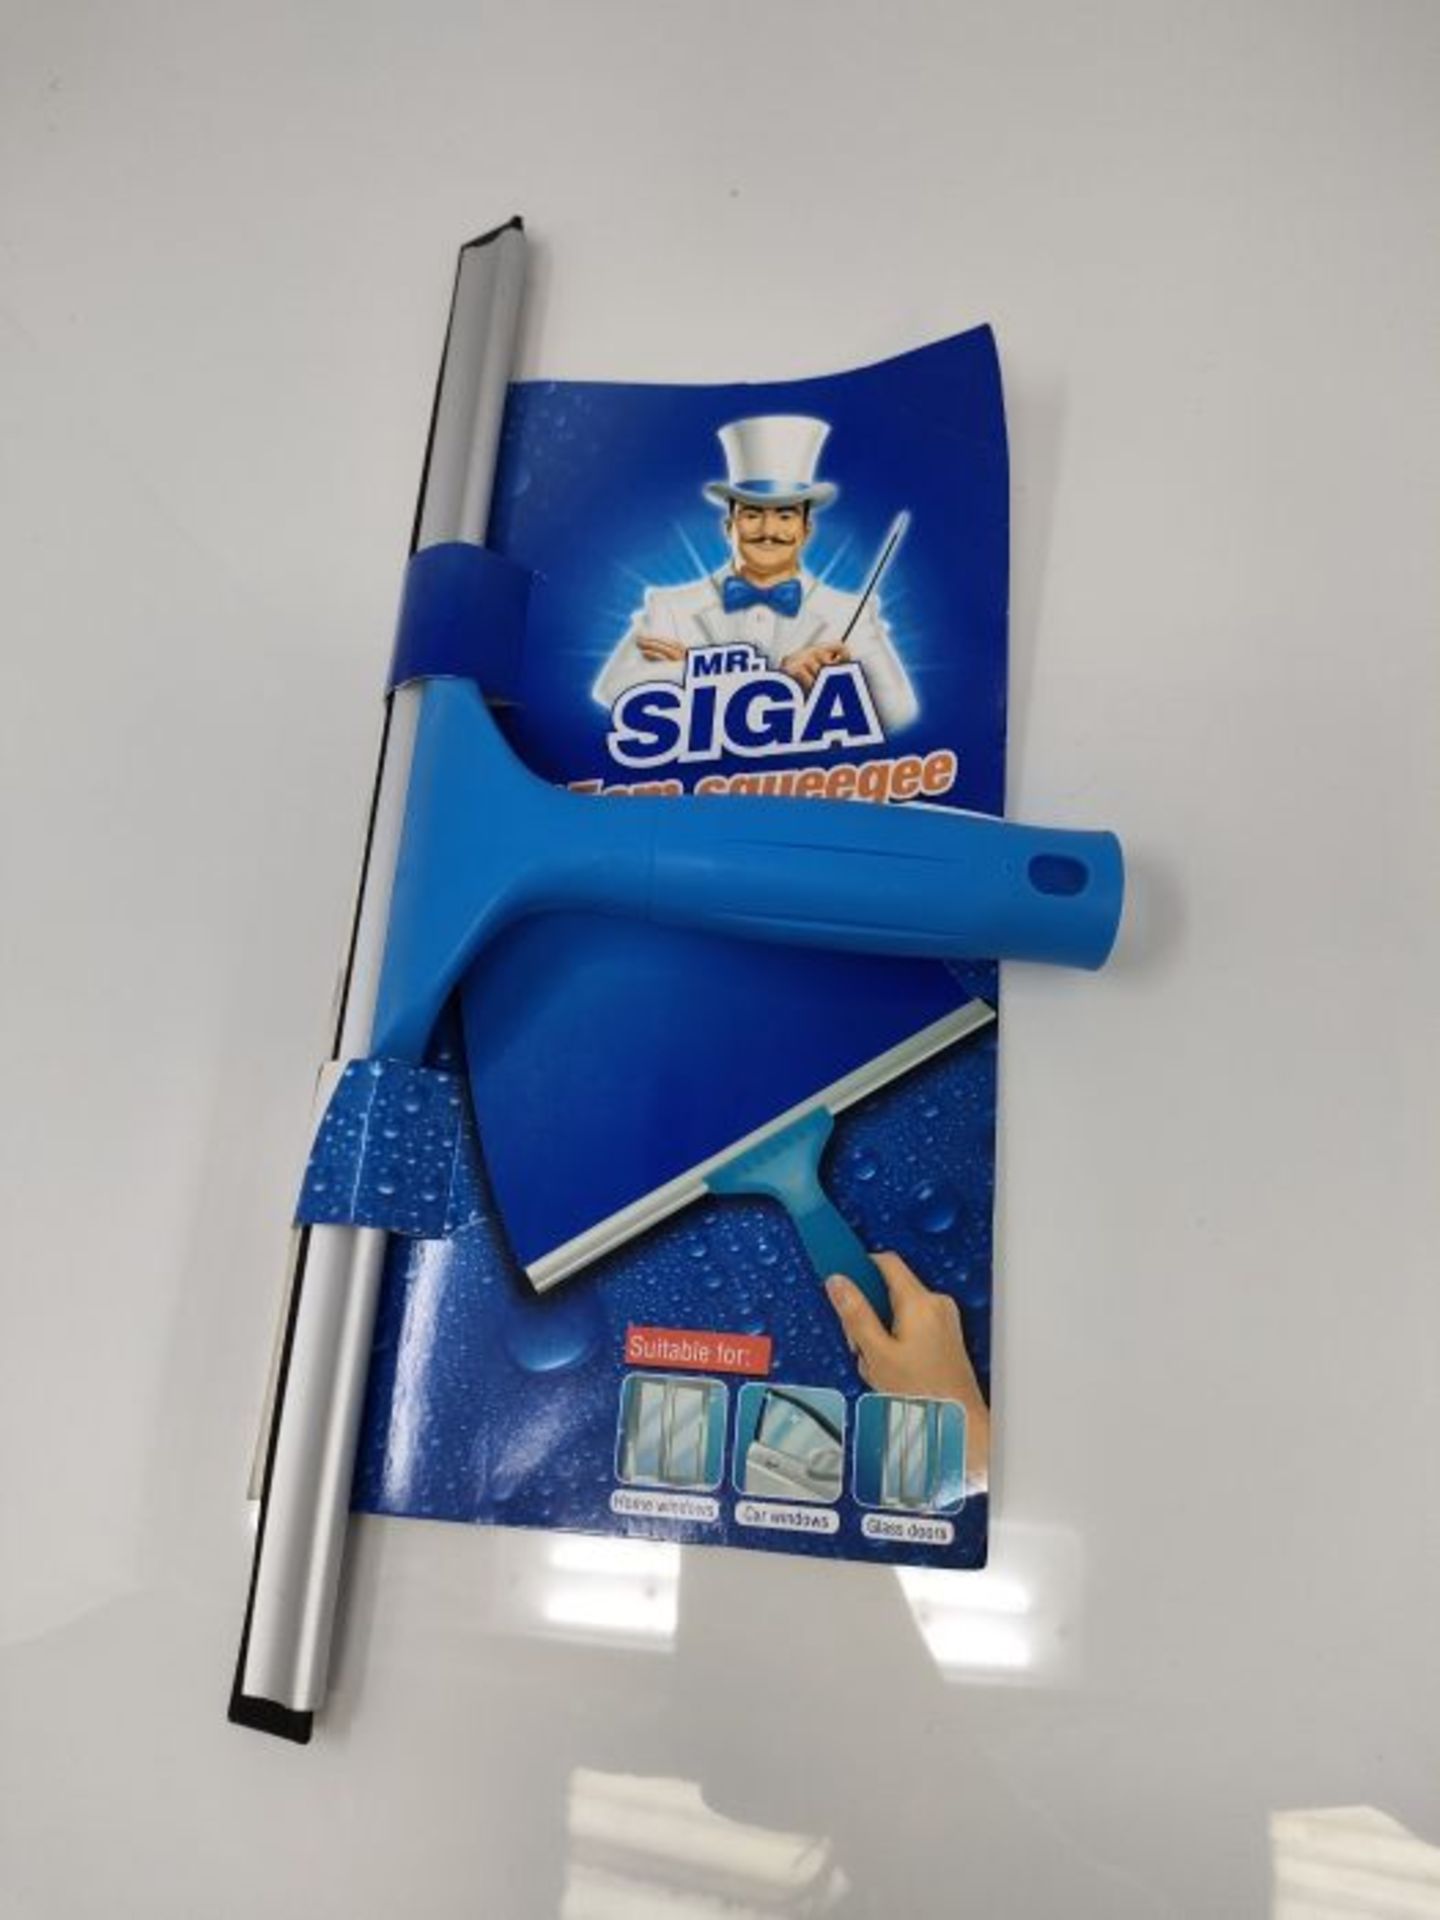 [INCOMPLETE] MR.SIGA Professional Window Cleaning Combo - Squeegee & Microfiber Window - Image 2 of 3